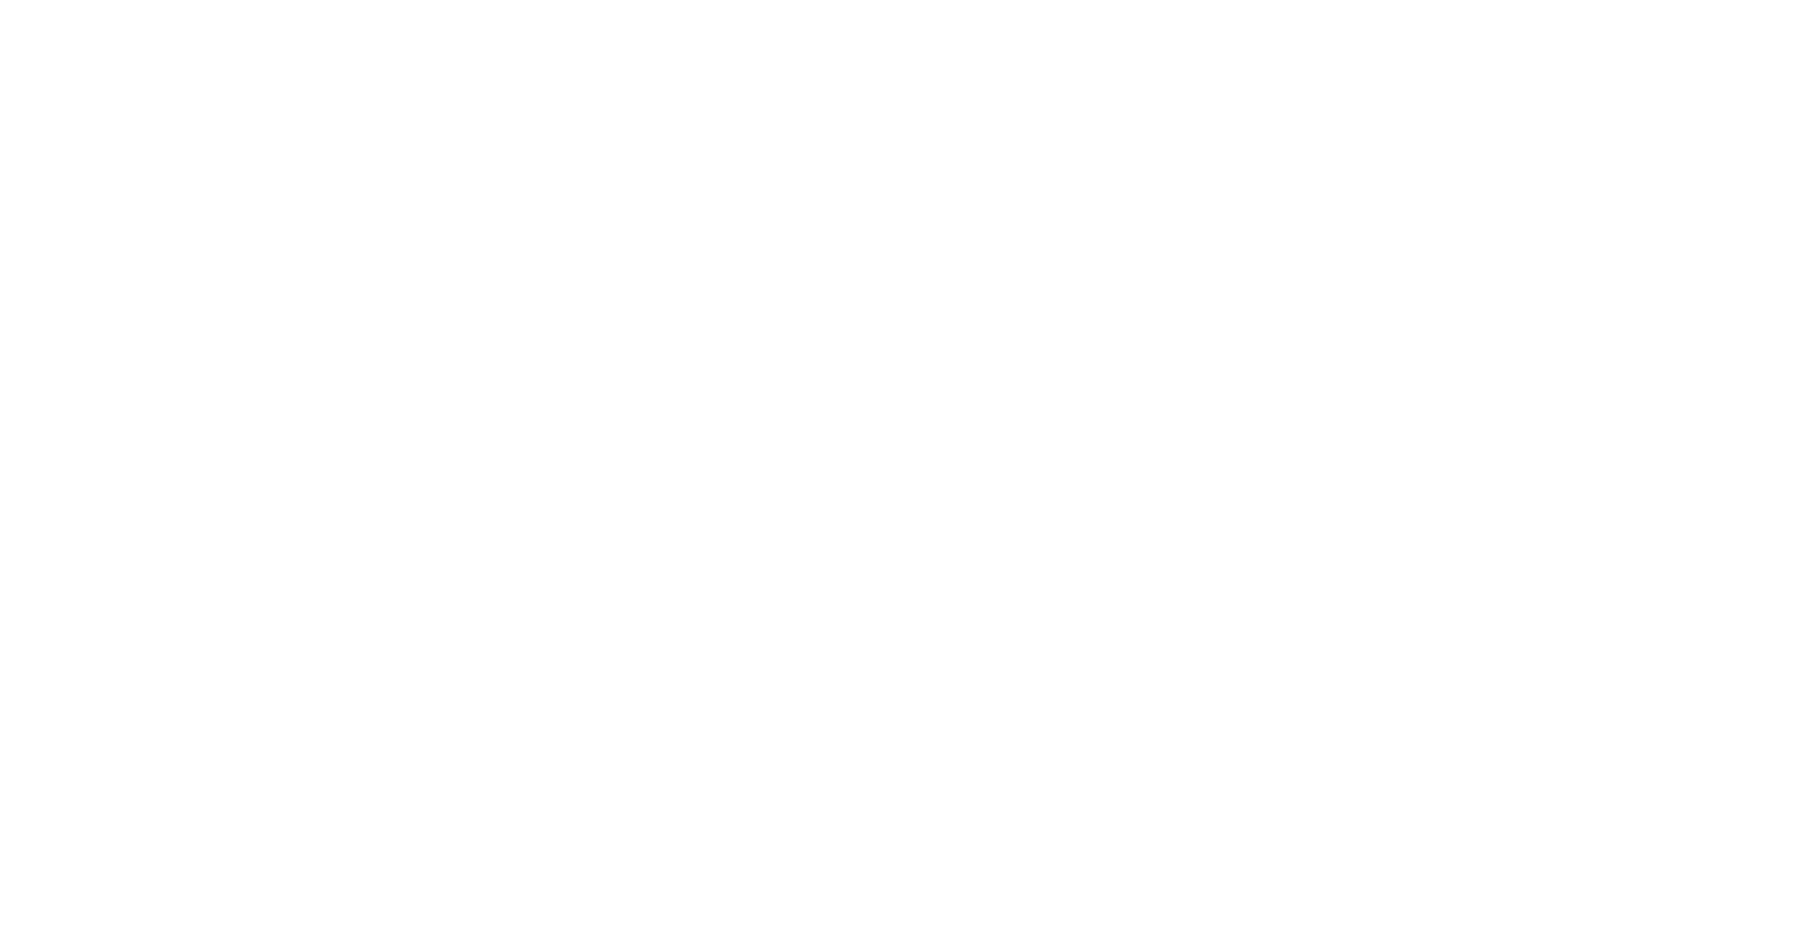 wash and fold delivery